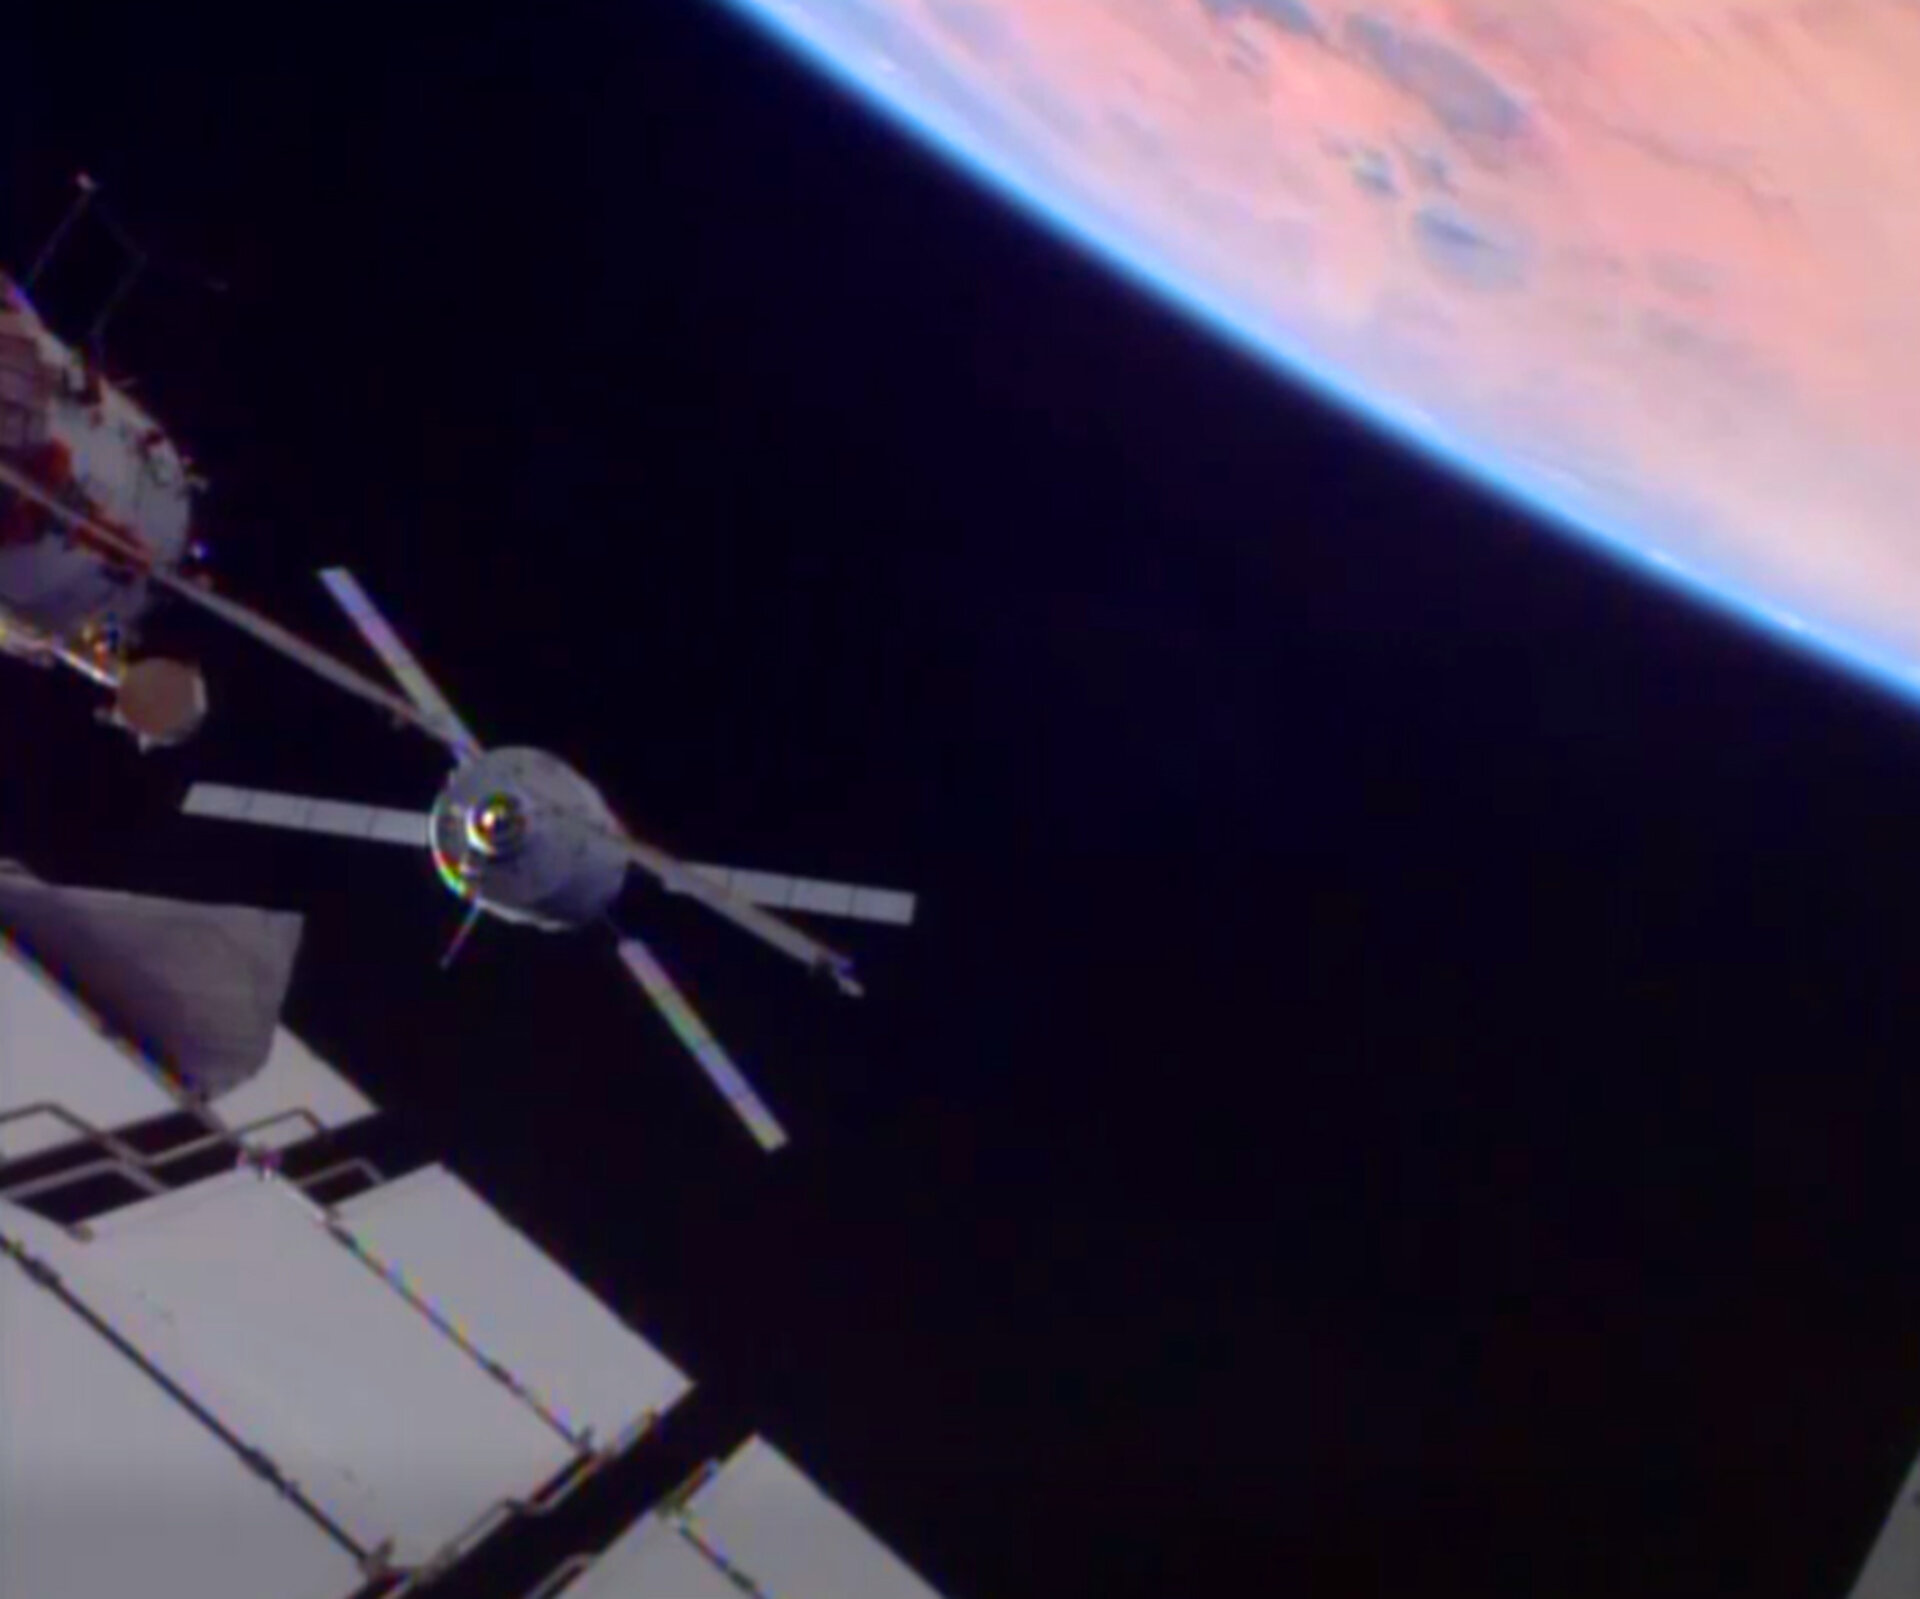 ESA's ATV-4 cargo vessel made contact with the ISS at 16:07 CEST on 15 June